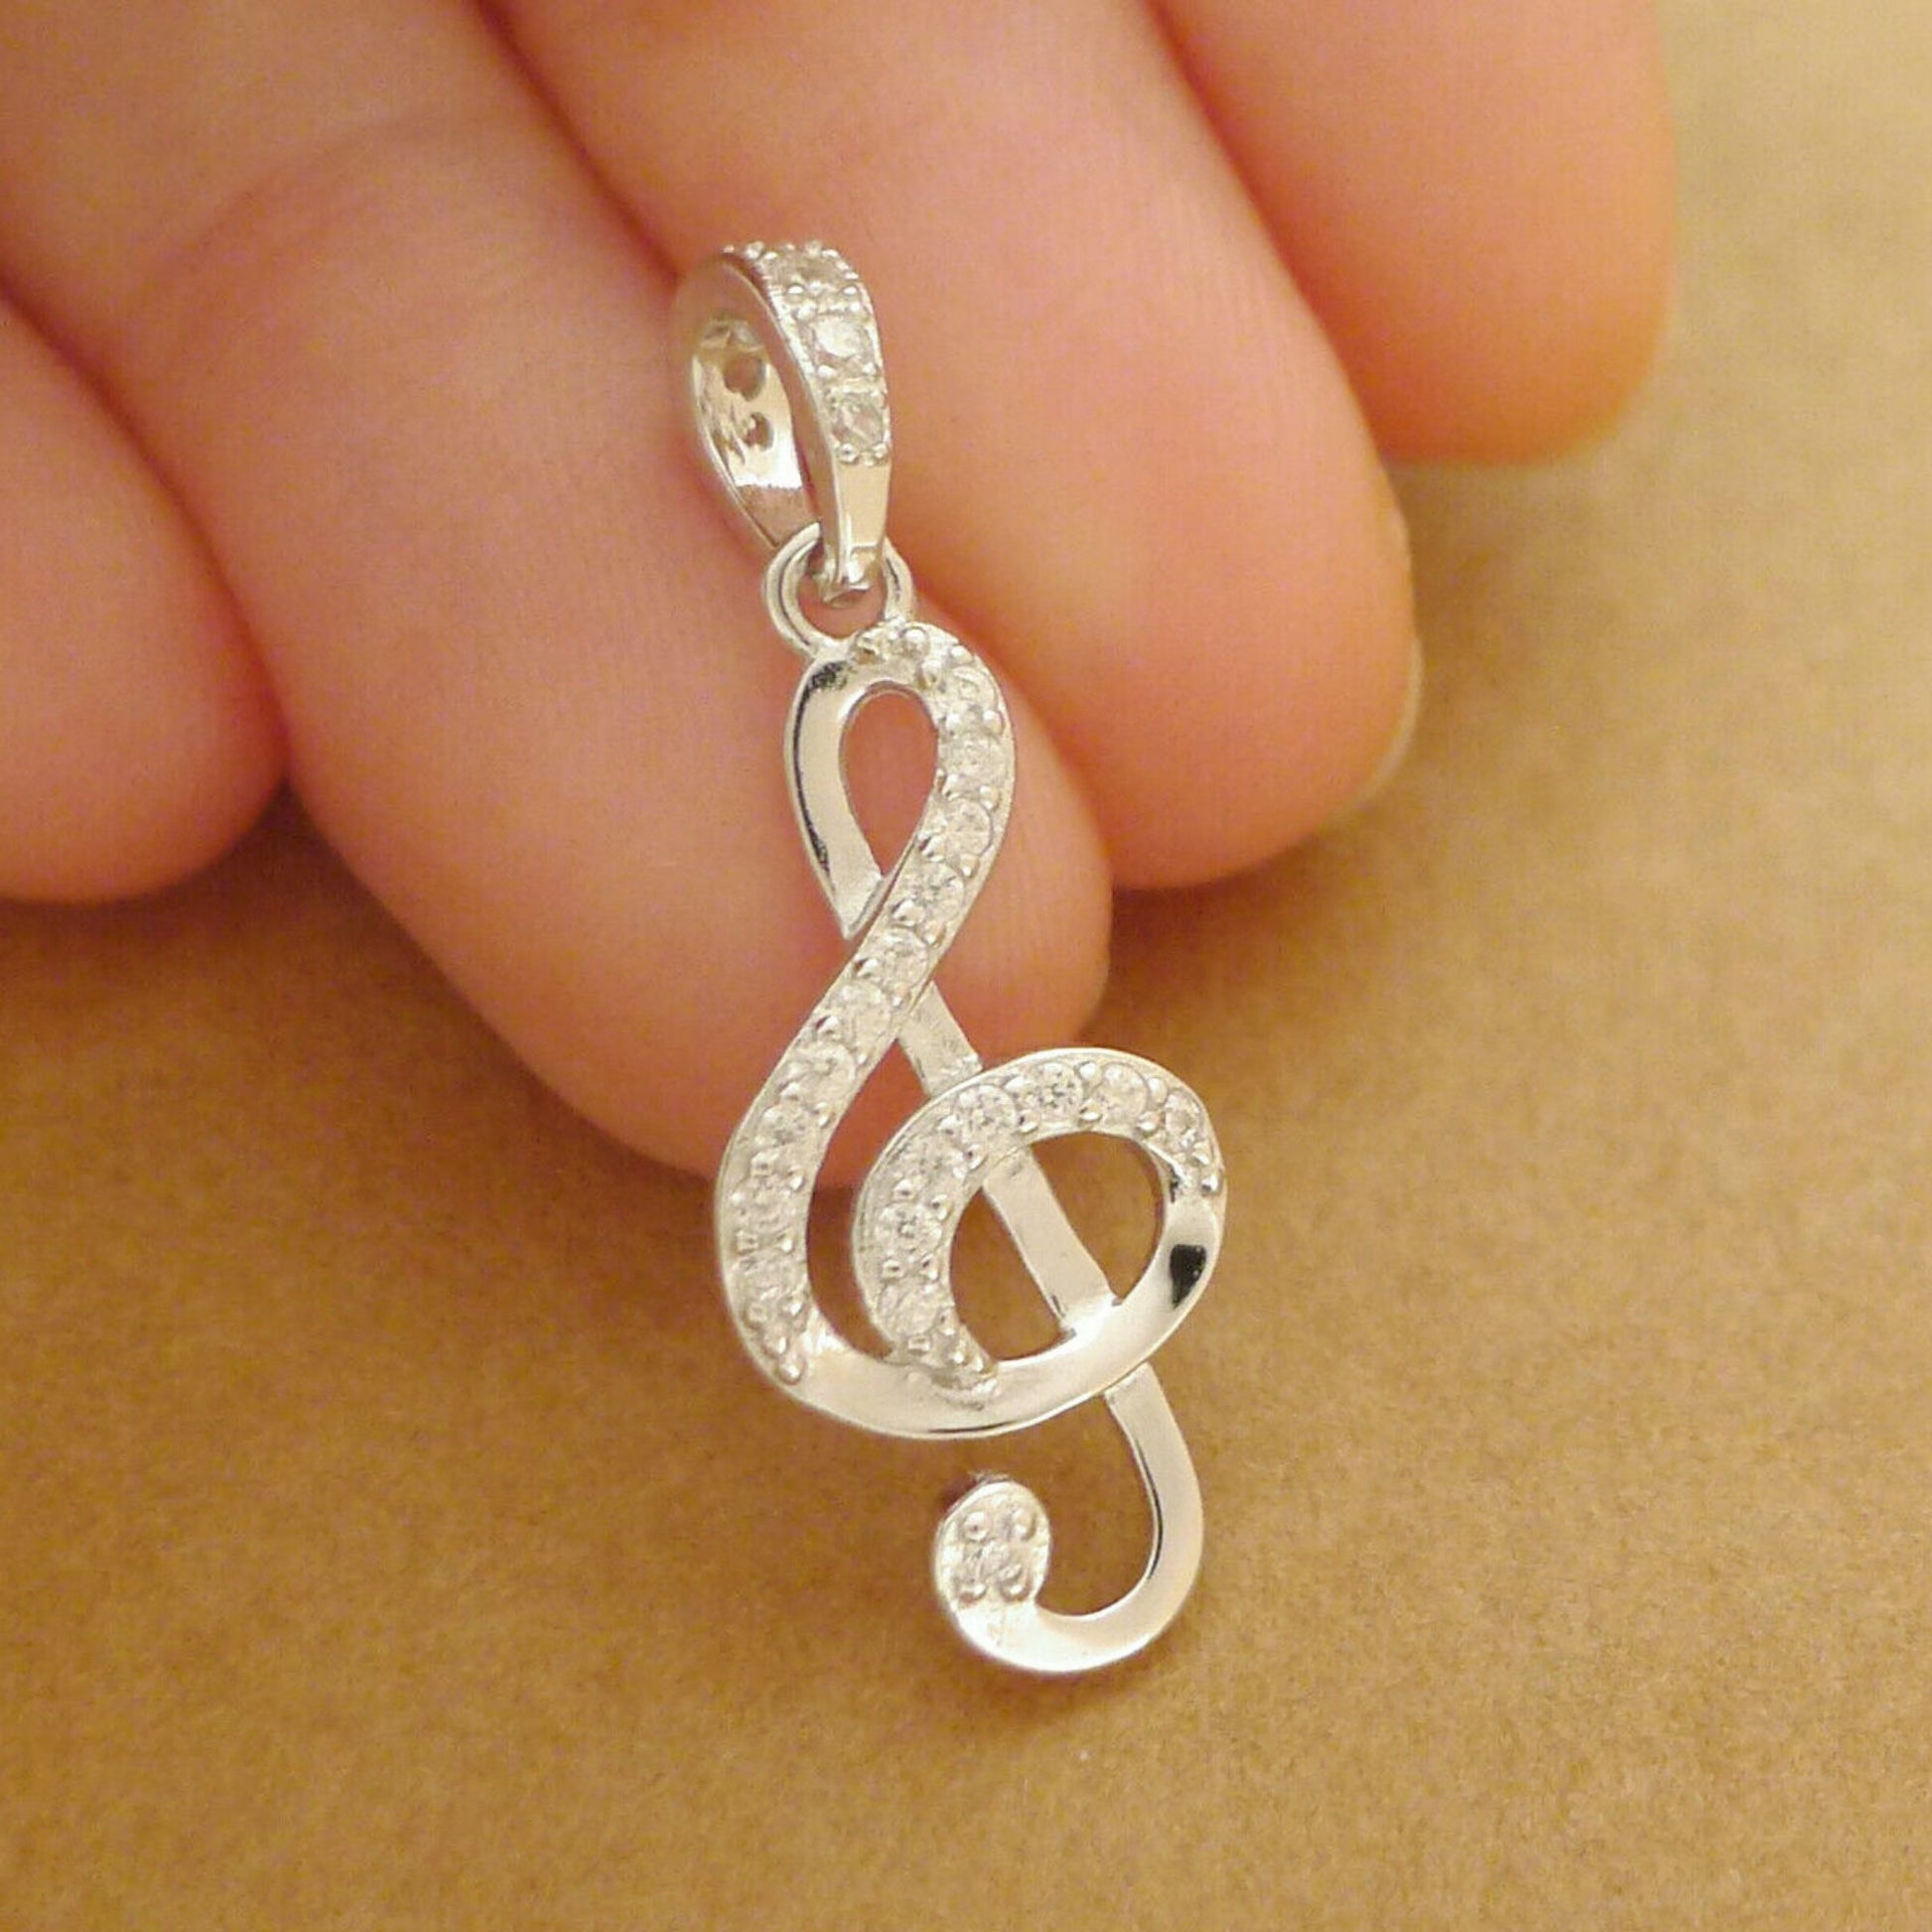 Sterling Silver CZ Treble Clef Necklace with G Music Note Pendant - sugarkittenlondon